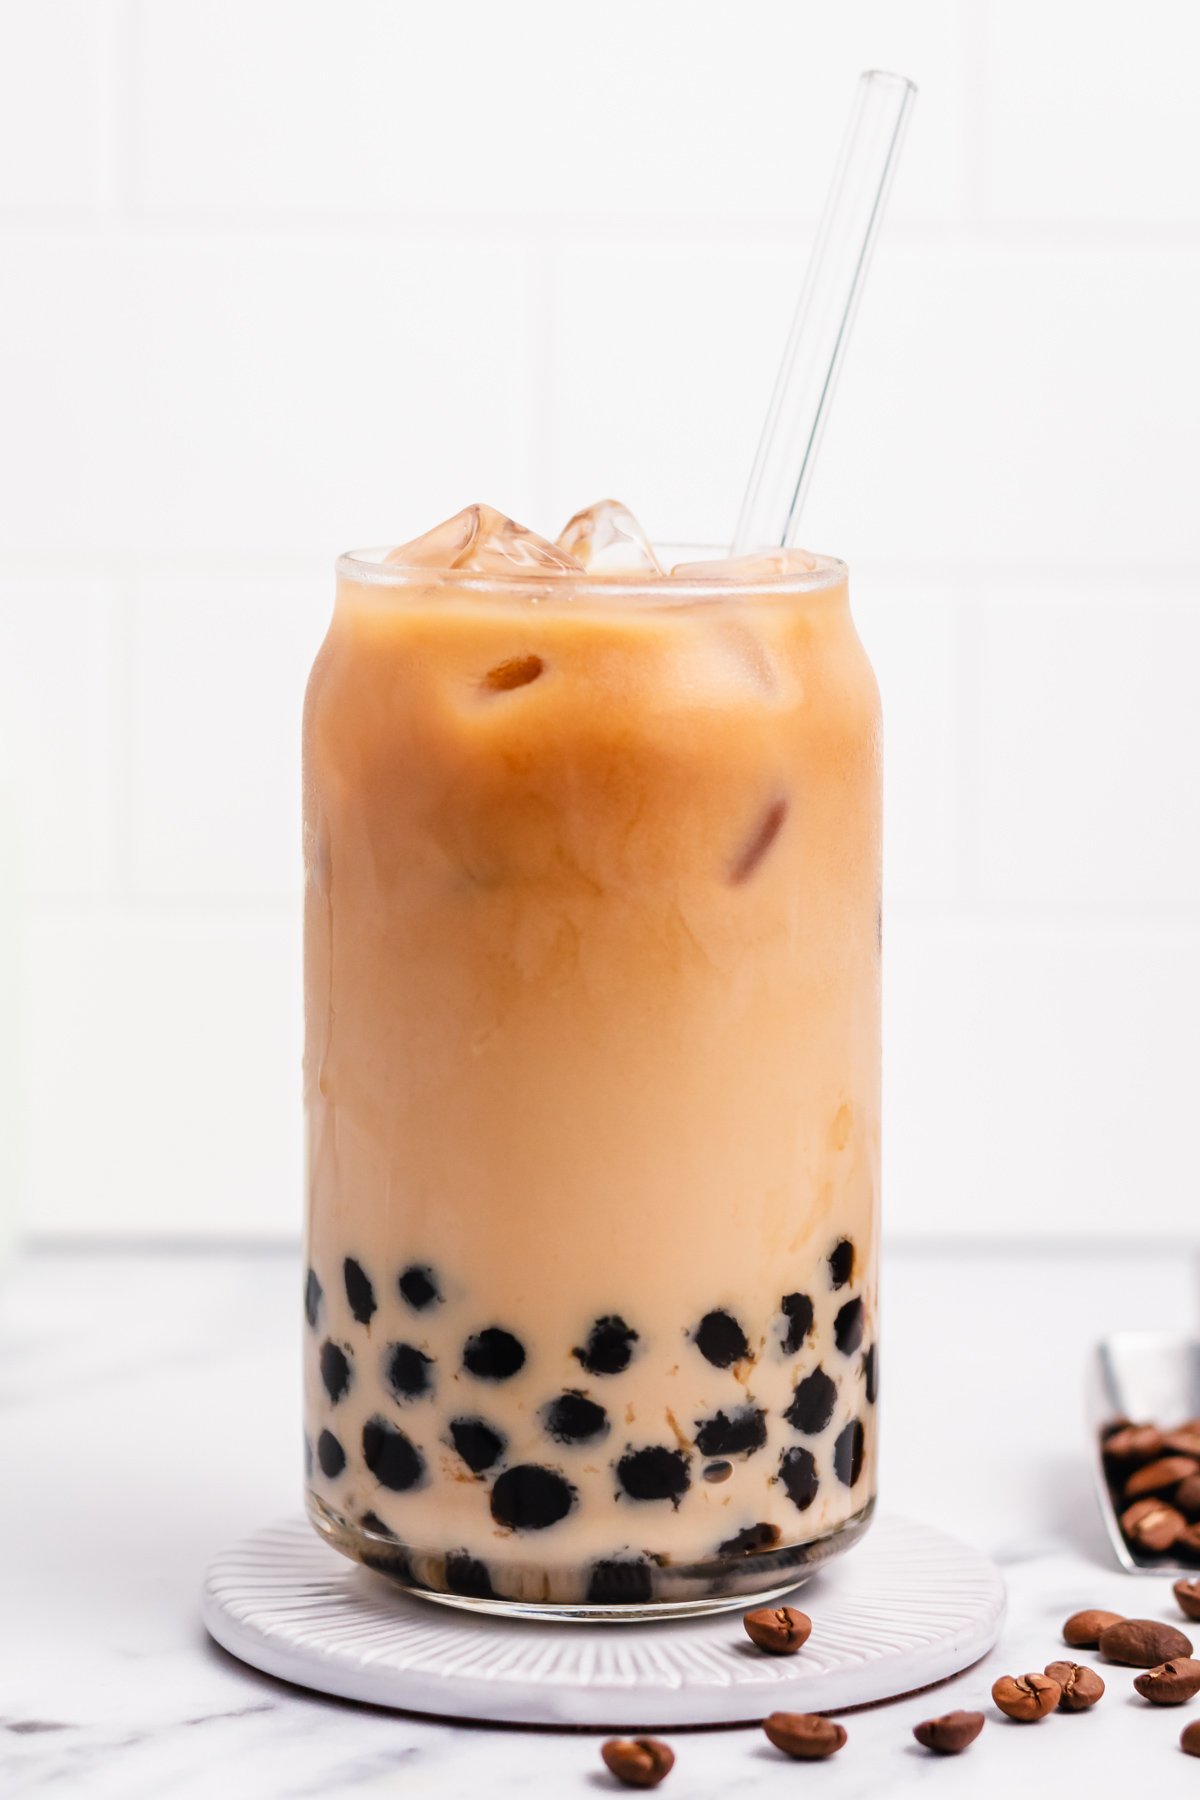 Boba coffee is naturally gluten free and can easily be dairy free as well. It uses only four ingredients to create a refreshing, visually appealing drink easily and quickly. Making your own bubble coffee at home saves you money and this versatile recipe can be tuned to your personal taste and hits the spot anytime from breakfast into the evening. #bobacoffee #bubblecoffee #glutenfreerecipes #dairyfreerecipes #glutenfreedairyfreerecipes #healthybreakfastrecipes